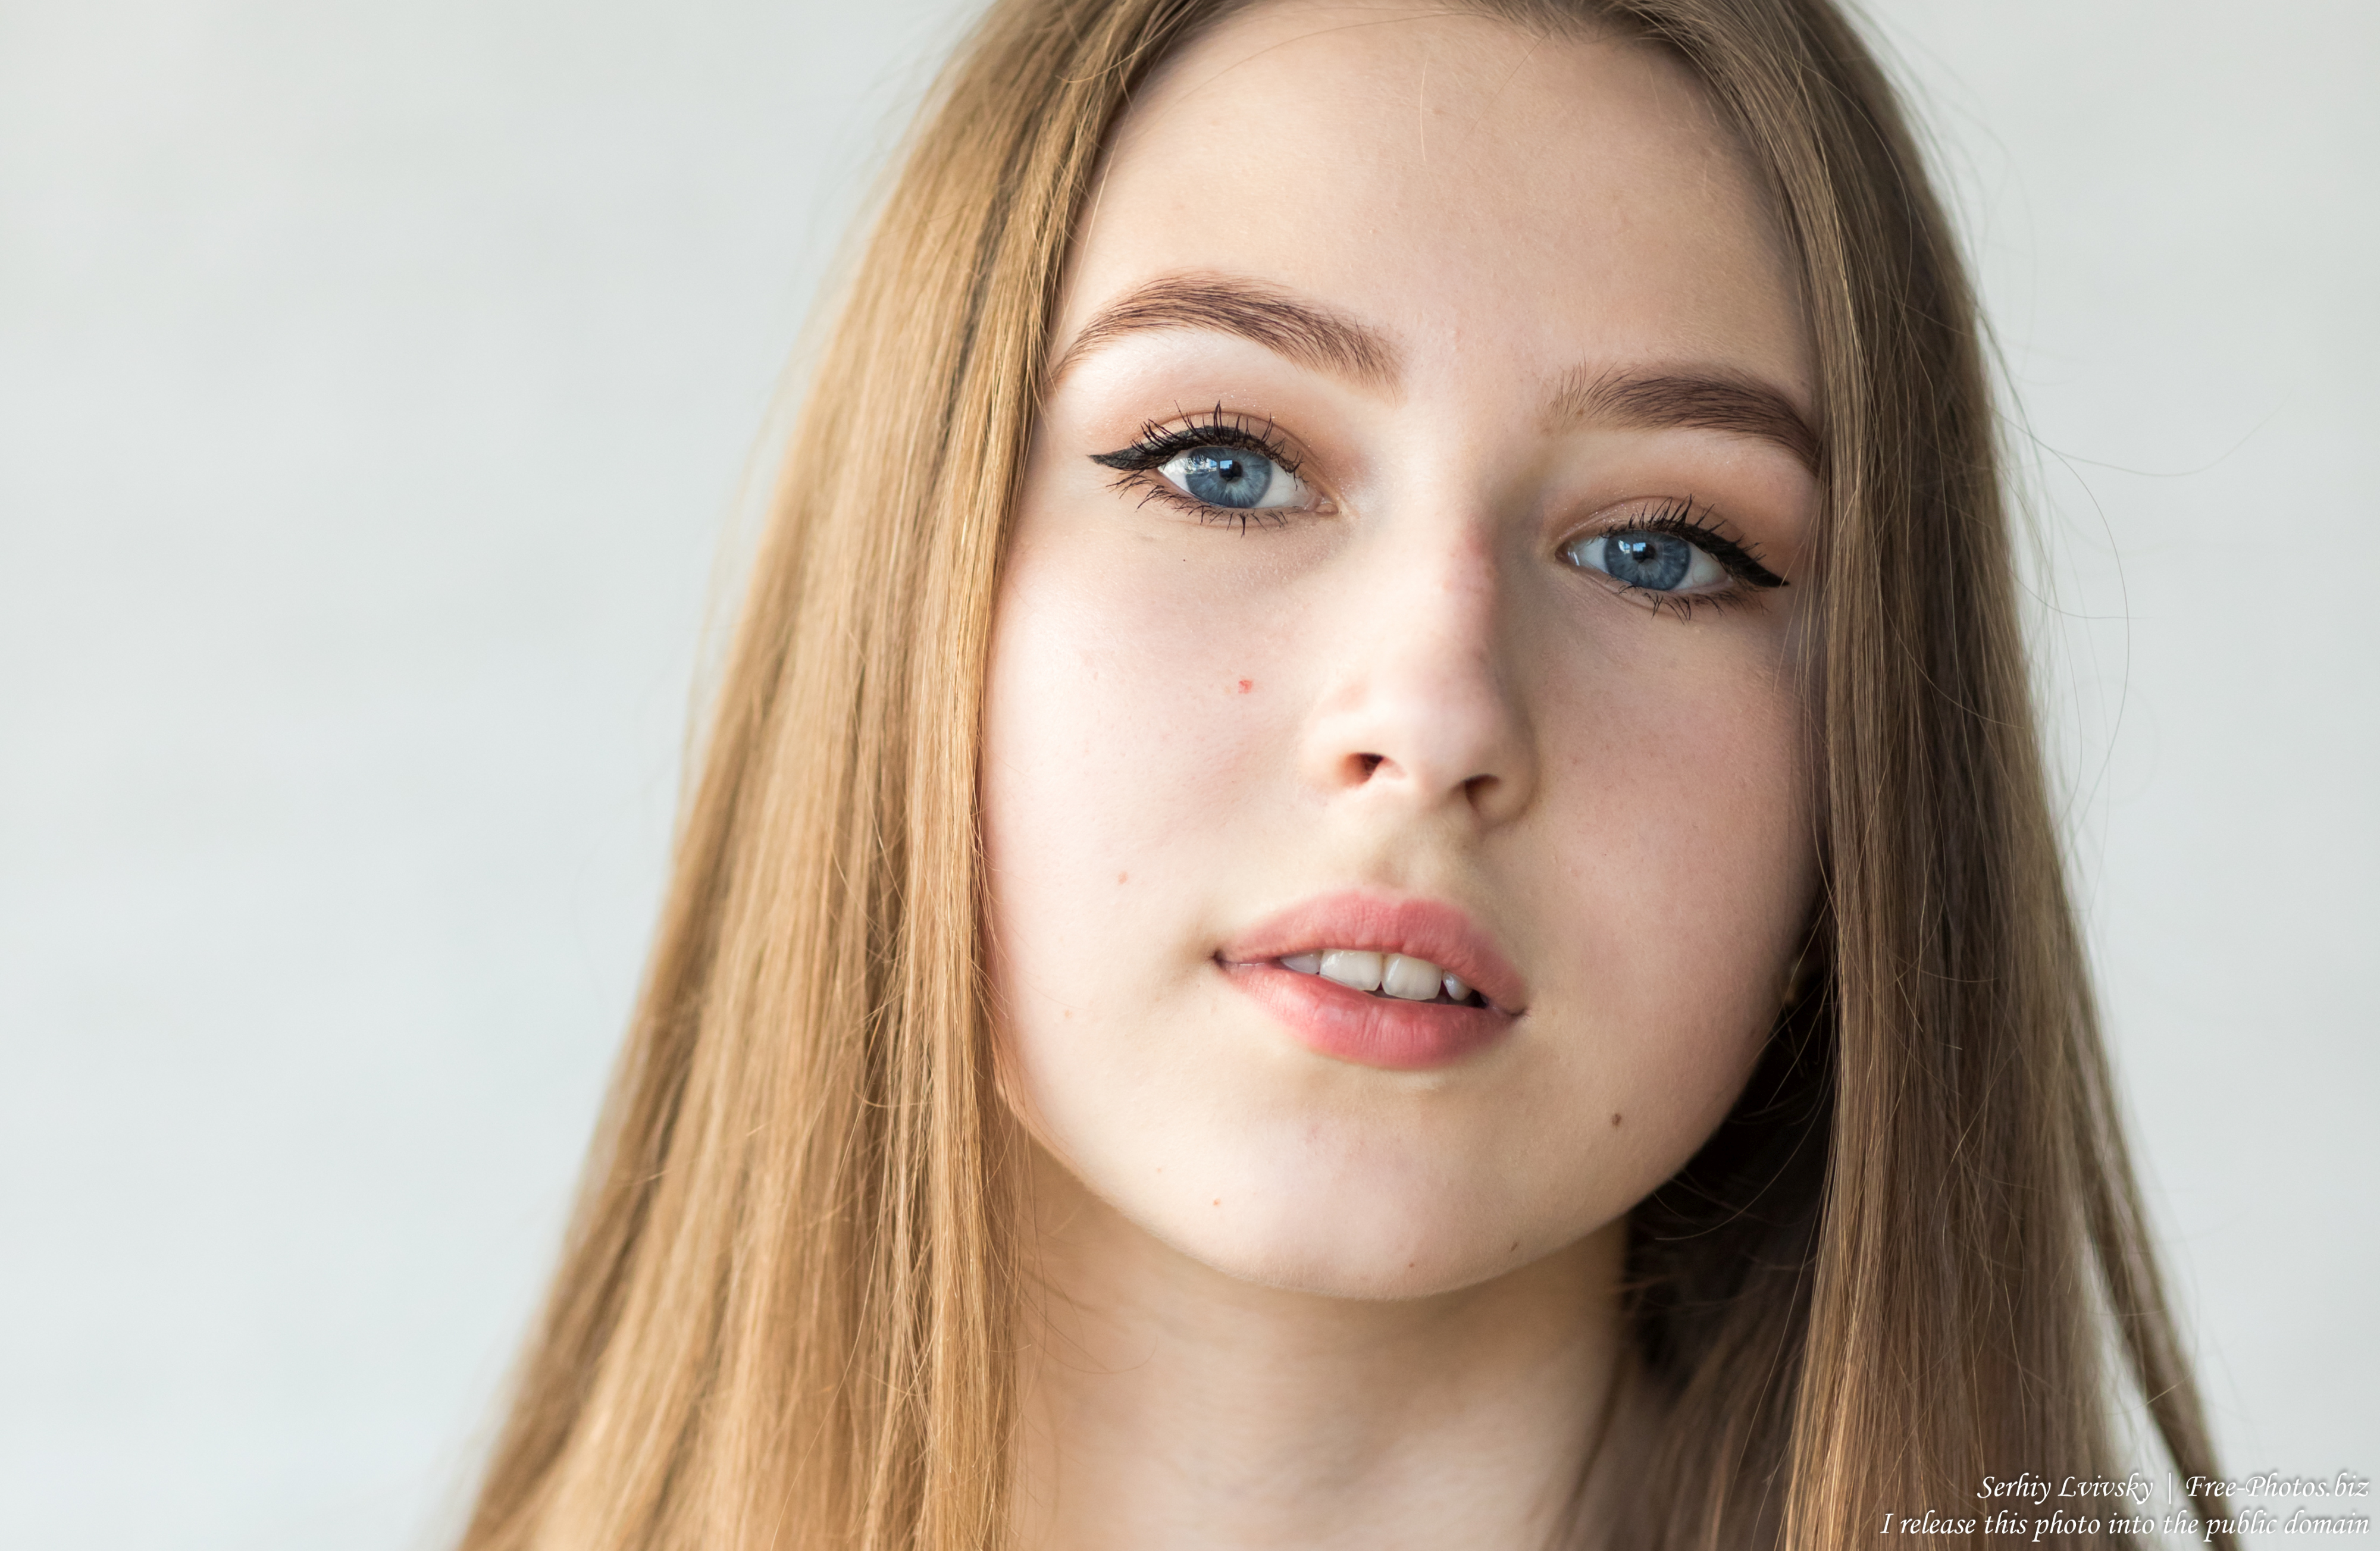 vika_a_17-year-old_girl_with_blue_eyes_and_natural_fair_hair_in_june_2019_by_serhiy_lvivsky_11